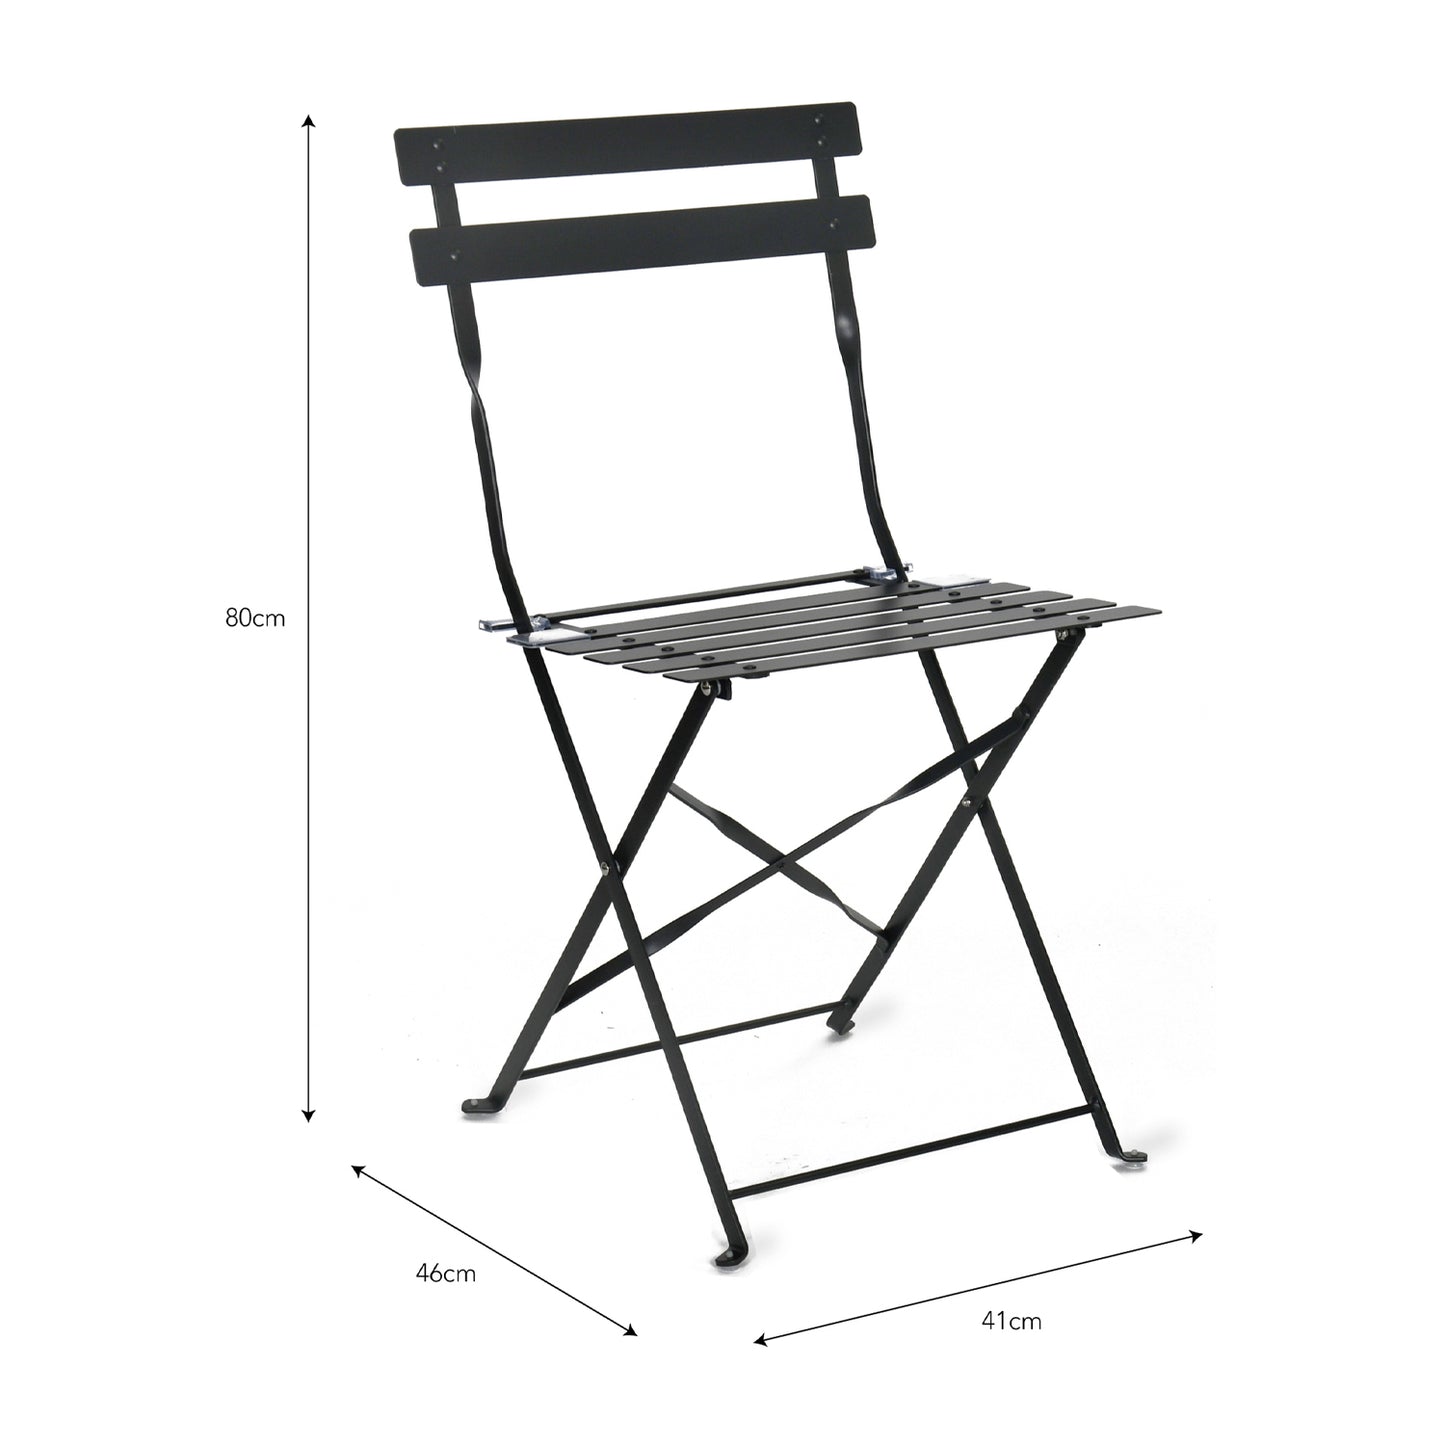 Pair of Bistro Outdoor Chairs in Carbon Steel by Garden Trading